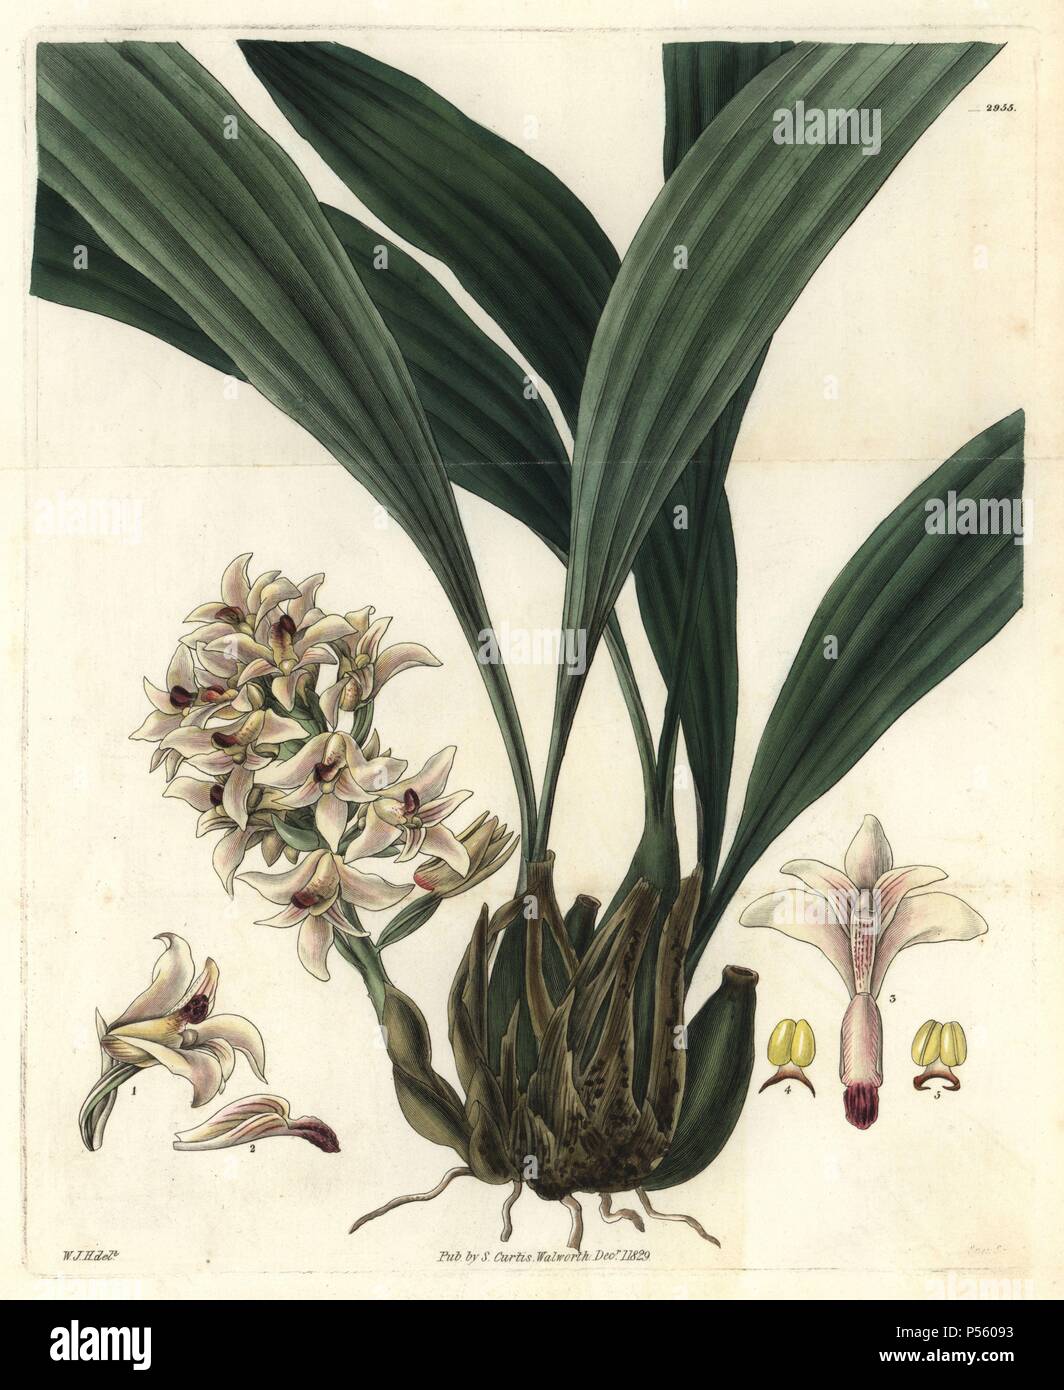 Scaly xylobium orchid, Xylobium squalens. Illustration drawn by William Jackson Hooker, engraved by Swan. Handcolored copperplate engraving from William Curtis's 'The Botanical Magazine,' Samuel Curtis, 1829. Hooker (1785-1865) was an English botanist, writer and artist. He was Regius Professor of Botany at Glasgow University, and editor of Curtis' 'Botanical Magazine' from 1827 to 1865. In 1841, he was appointed director of the Royal Botanic Gardens at Kew, and was succeeded by his son Joseph Dalton. Hooker documented the fern and orchid crazes that shook England in the mid-19th century in bo Stock Photo